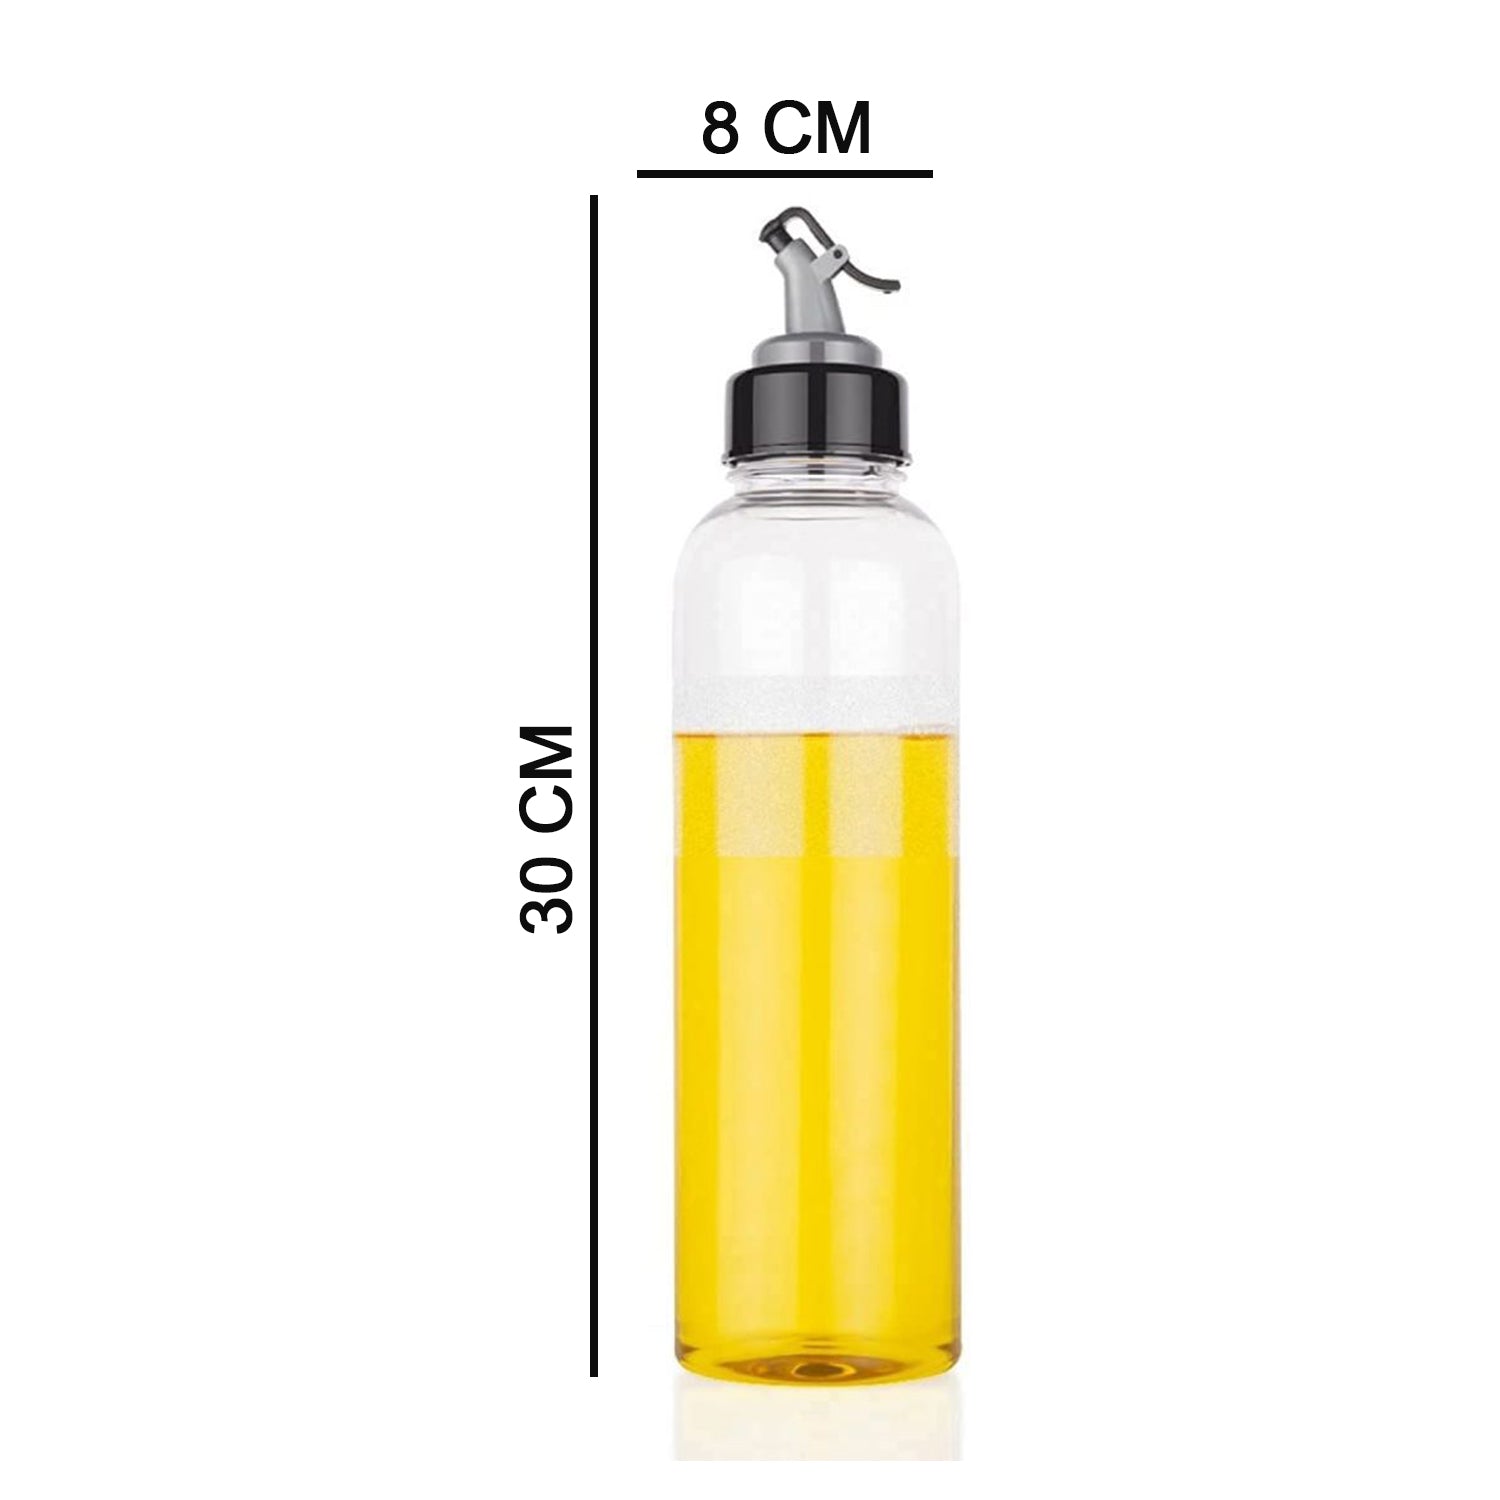 2288 1ltr Glass Oil Dispenser With Lid - Clear, Drip Free Spout, Controlled Use.